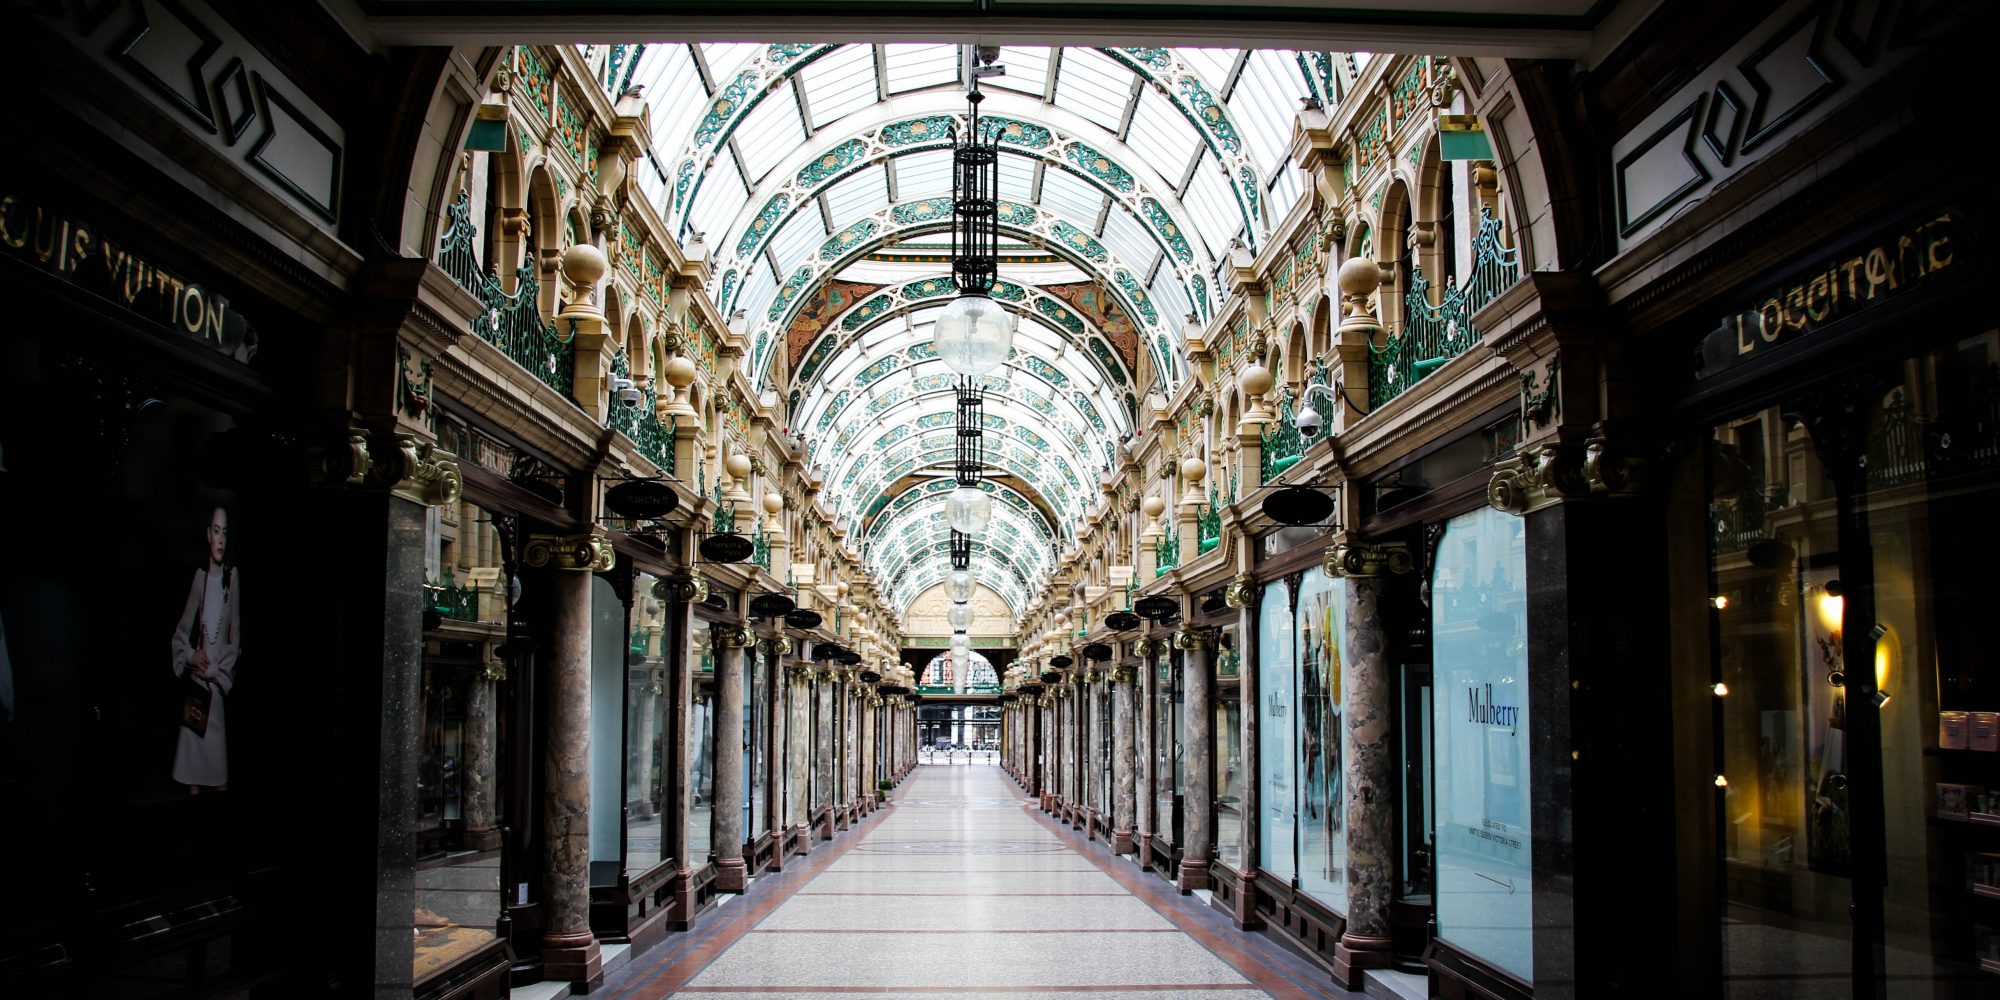 Period shopping arcade with decorative glass domed roof. Visit Leeds seeking to create bookable products for the tourism market.